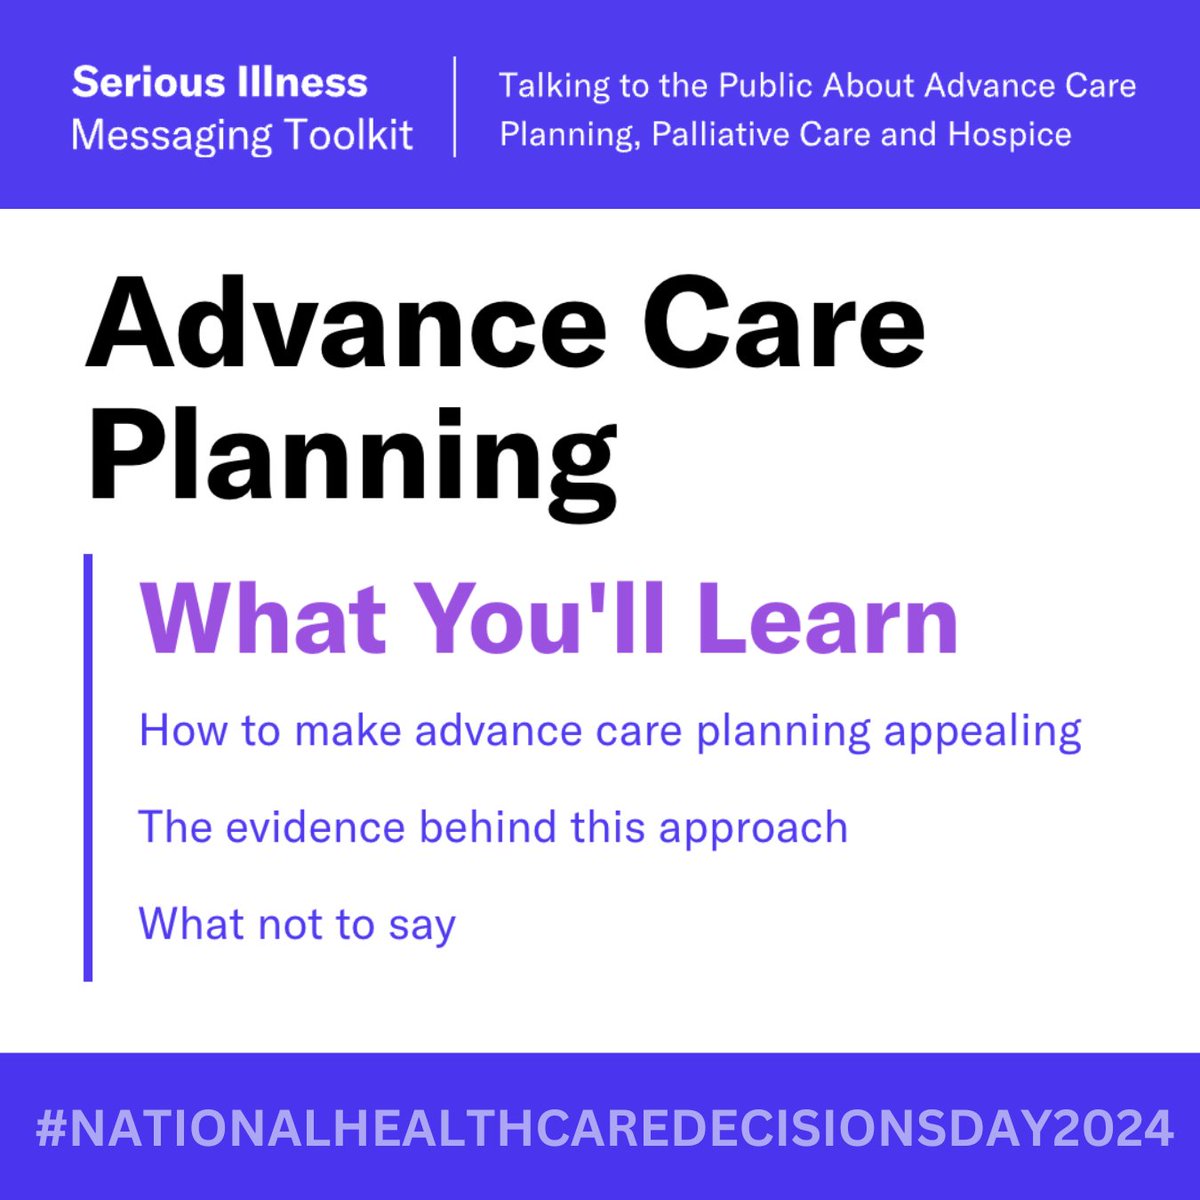 National Healthcare Decisions Day is just one day away! The idea behind advance care planning is what resonates: it's about choice. Use the Advance Care Planning Quick Guide for messaging tactics & tools on how to engage others in ACP conversations! #NHDD seriousillnessmessaging.org/quick-guides/a…